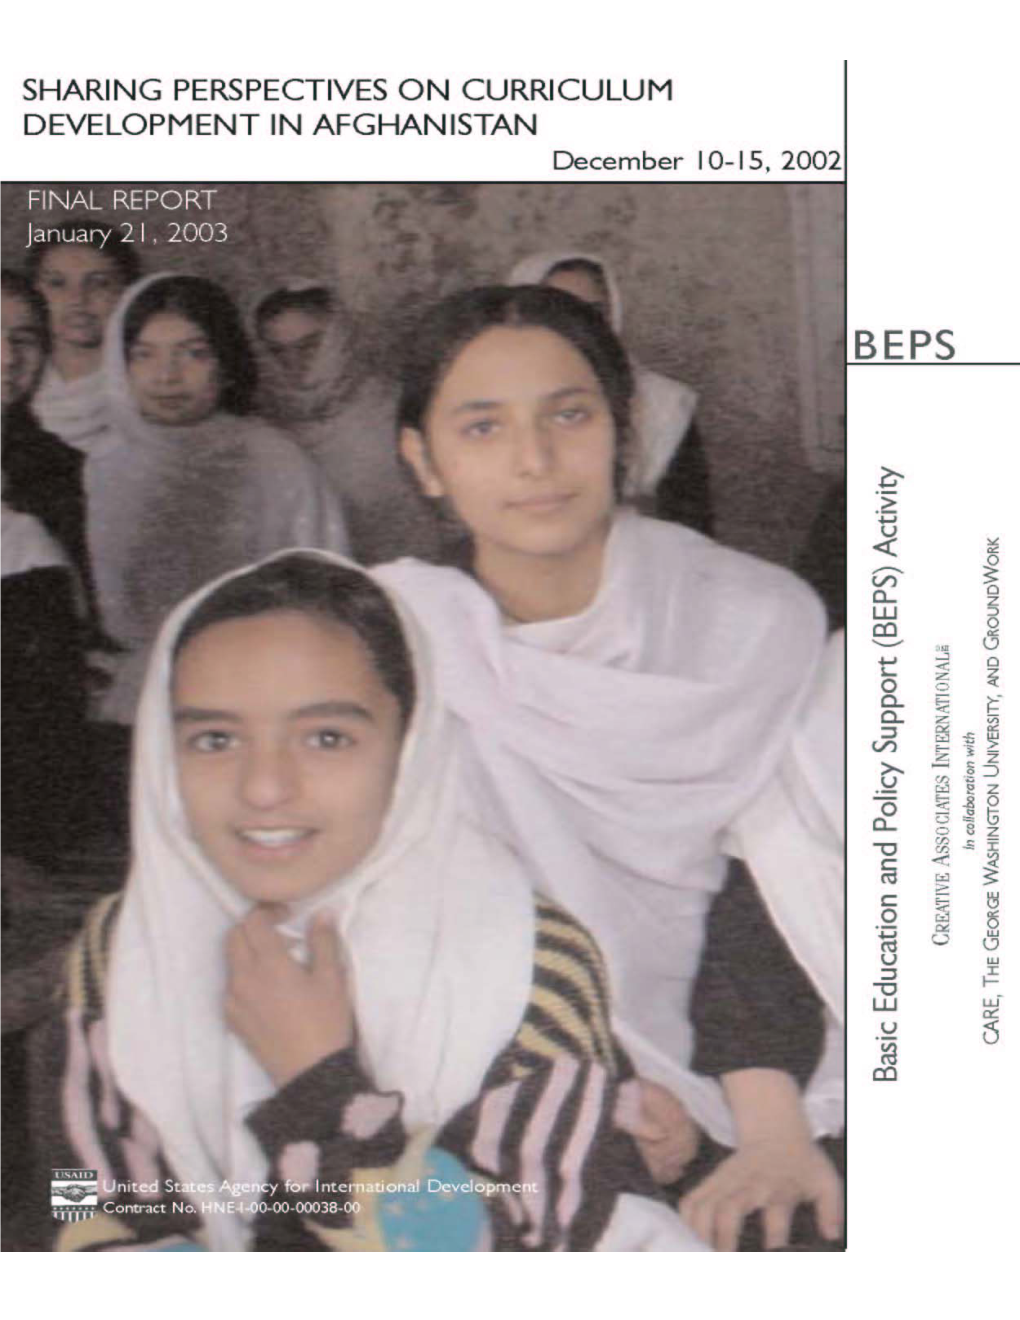 Sharing Perspectives on Curriculum Development in Afghanistan Final Report